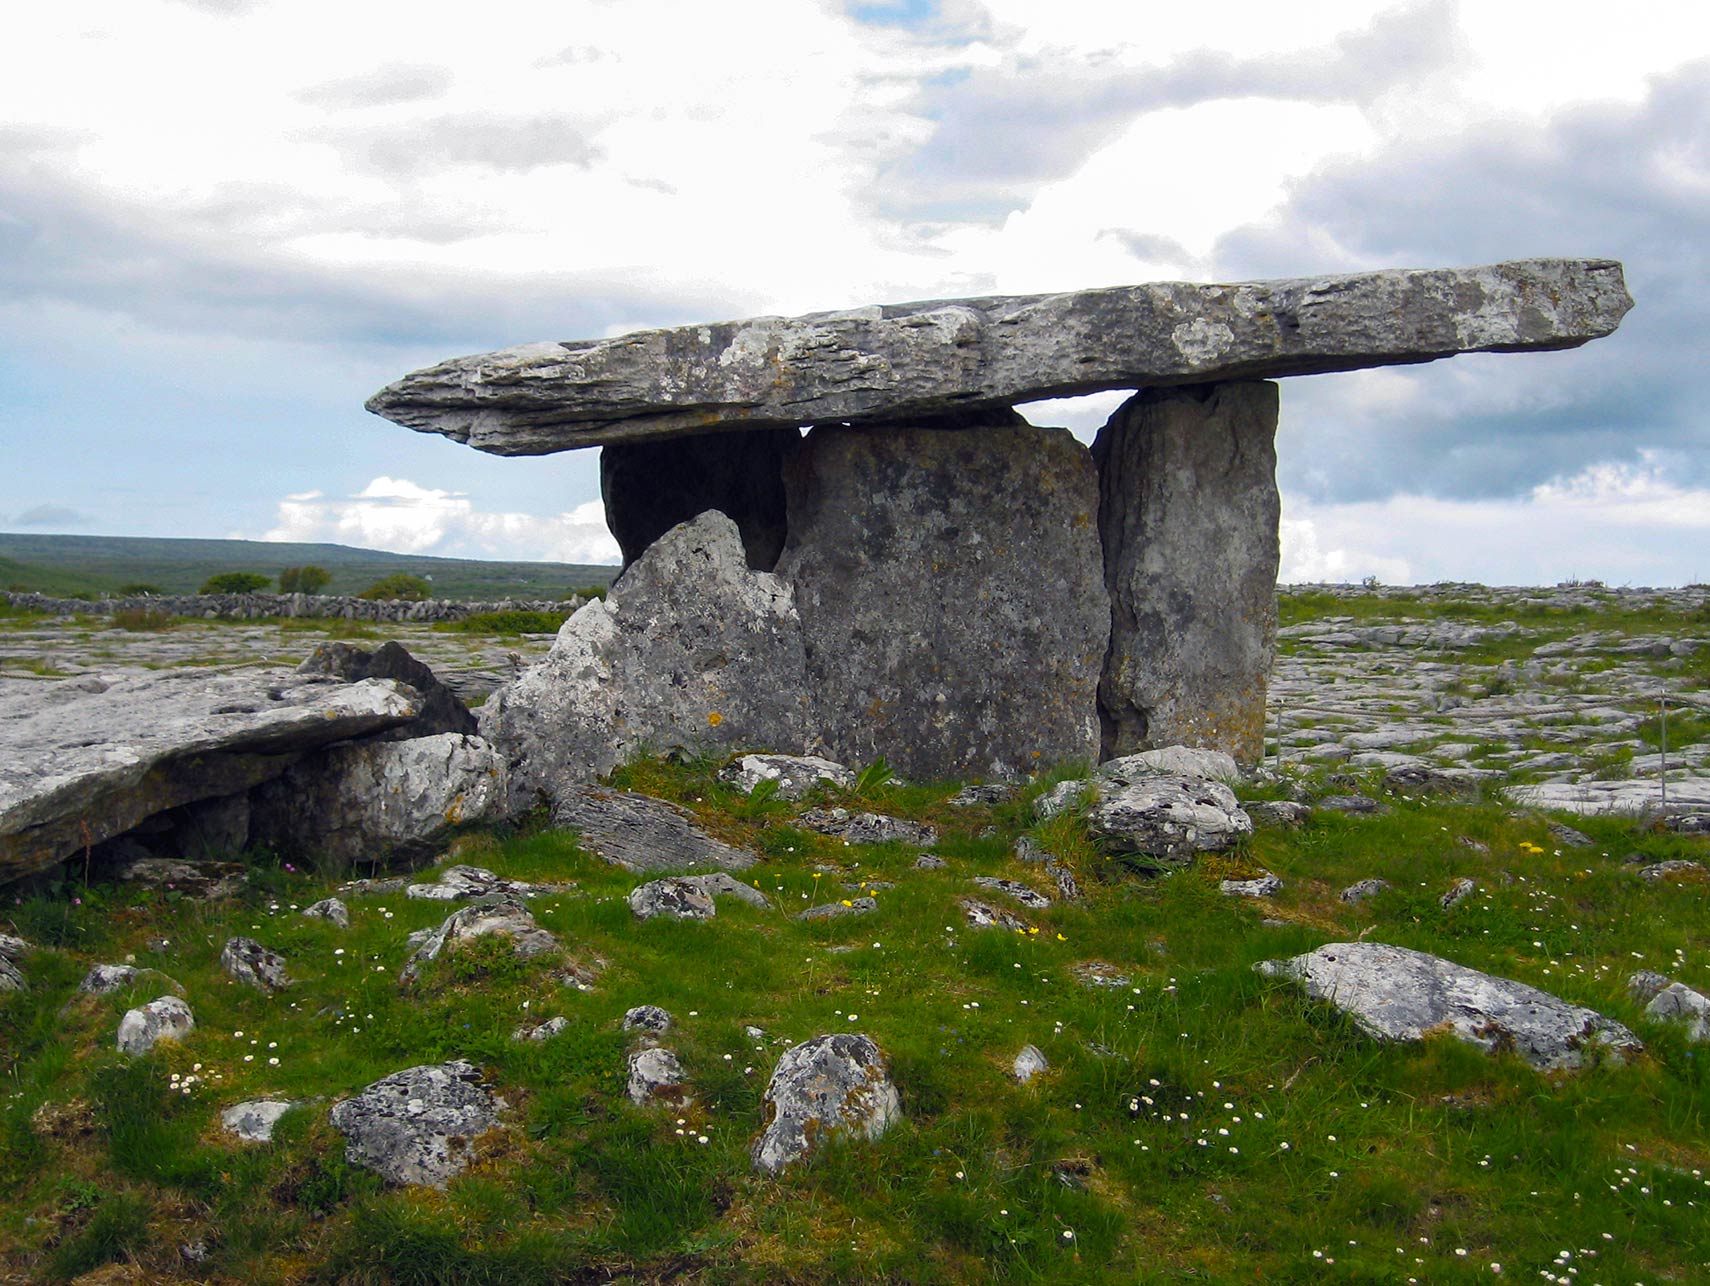 Poulnabrone dolmen, a megalithic passage tomb in the Burren, Ireland